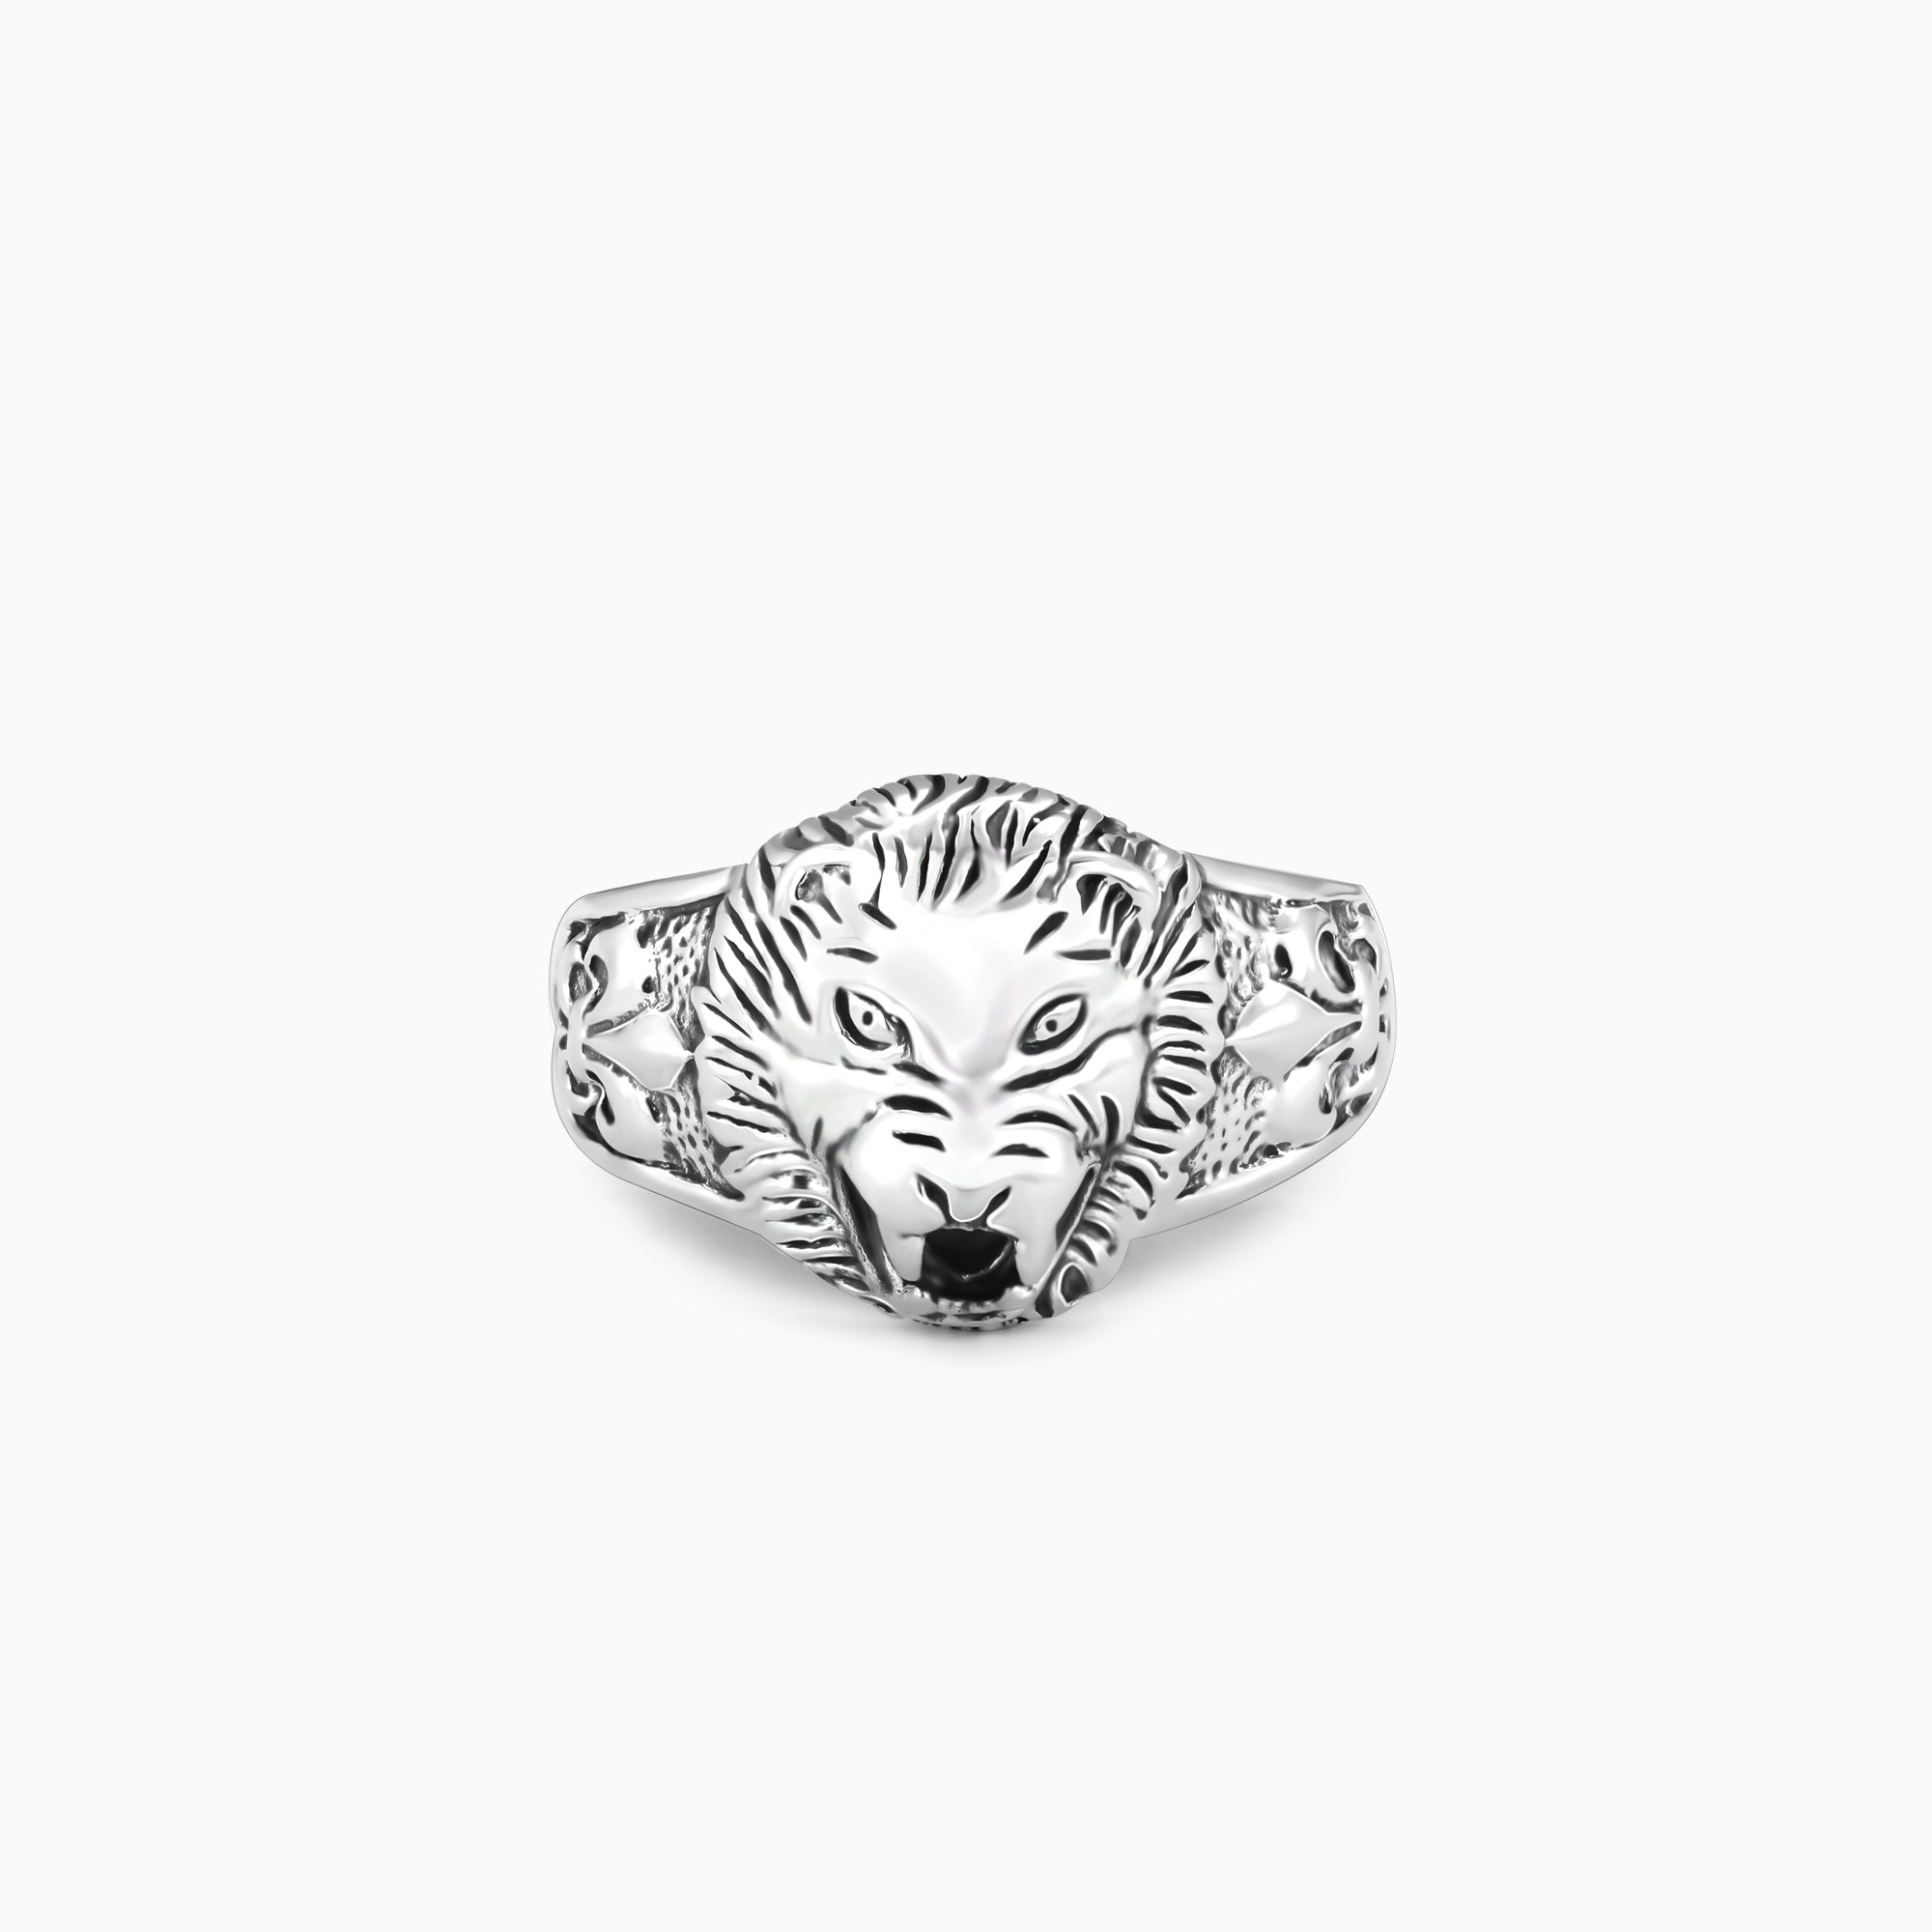 Buy Myaka Lion Ring for Boys (Large Size 16-17 Silver) at Amazon.in